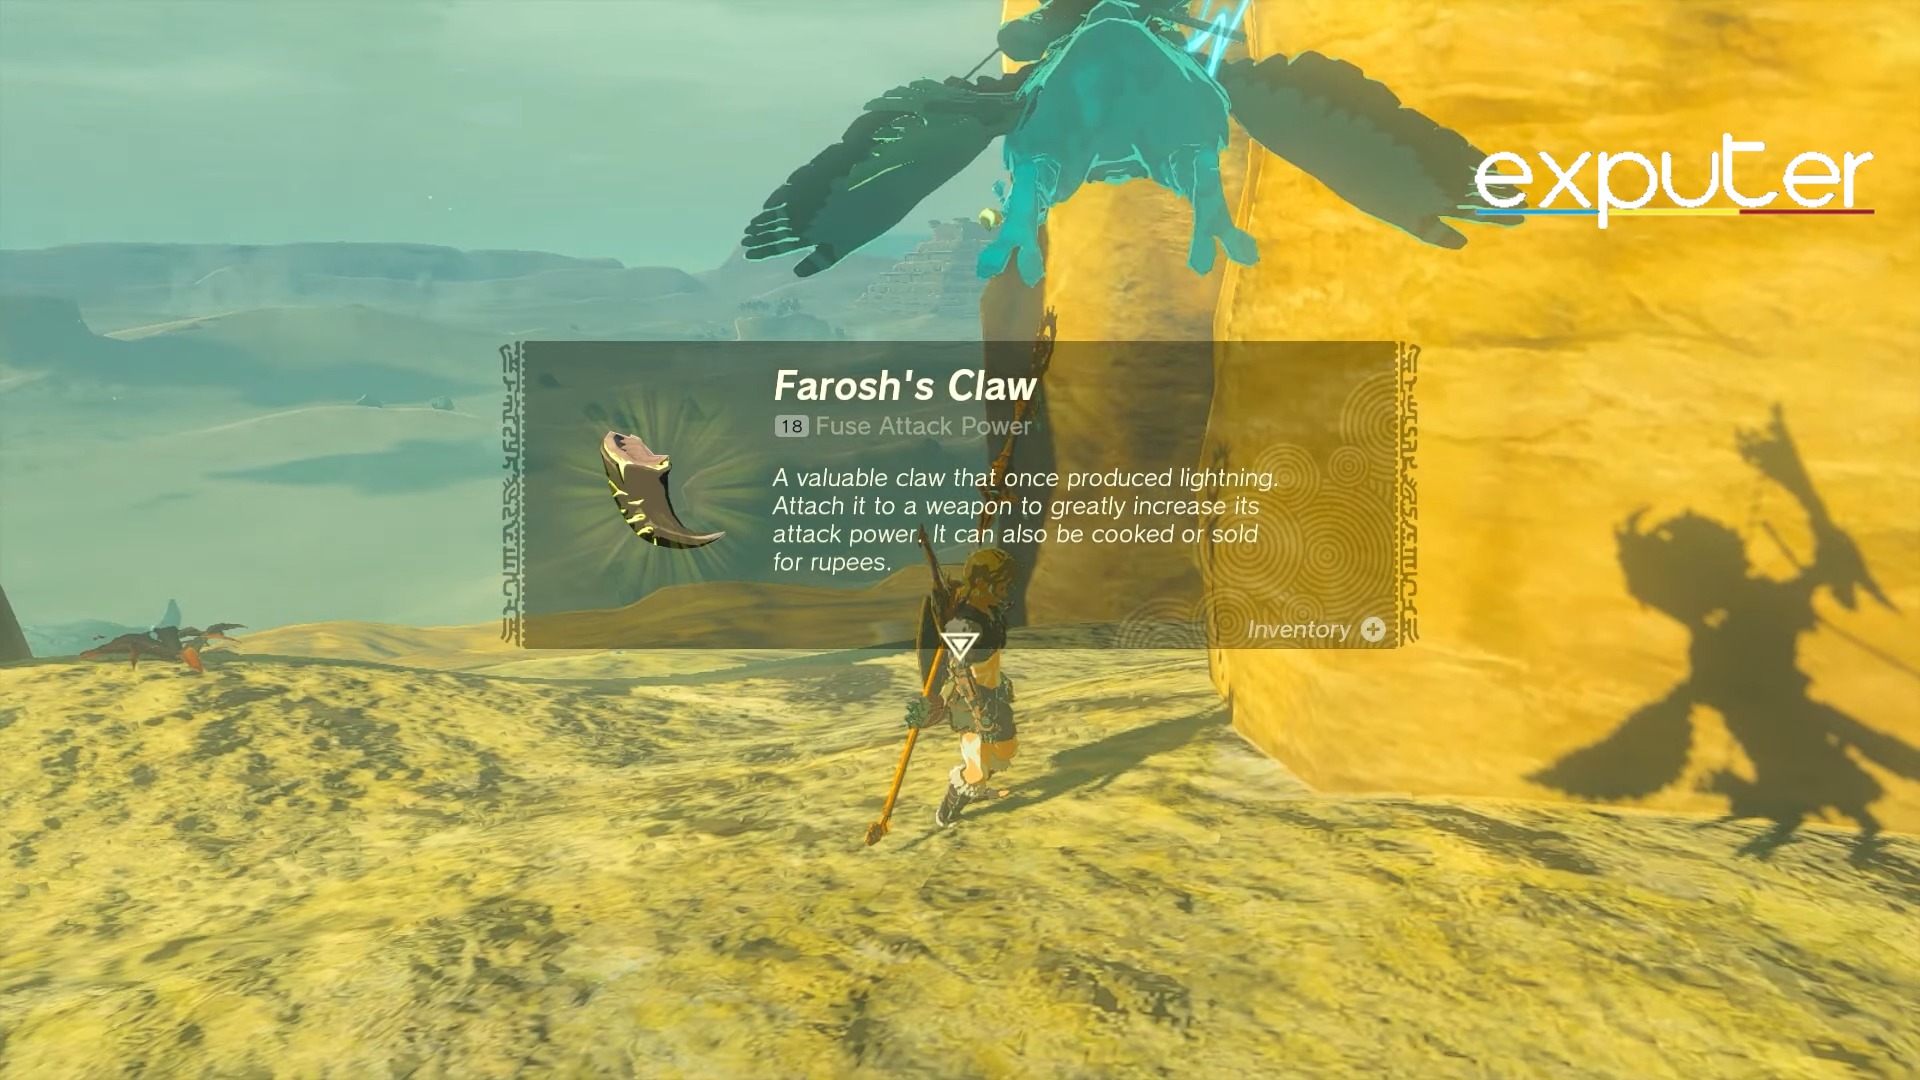 Farosh's Claw goddess statue of courage tears of the kingdom